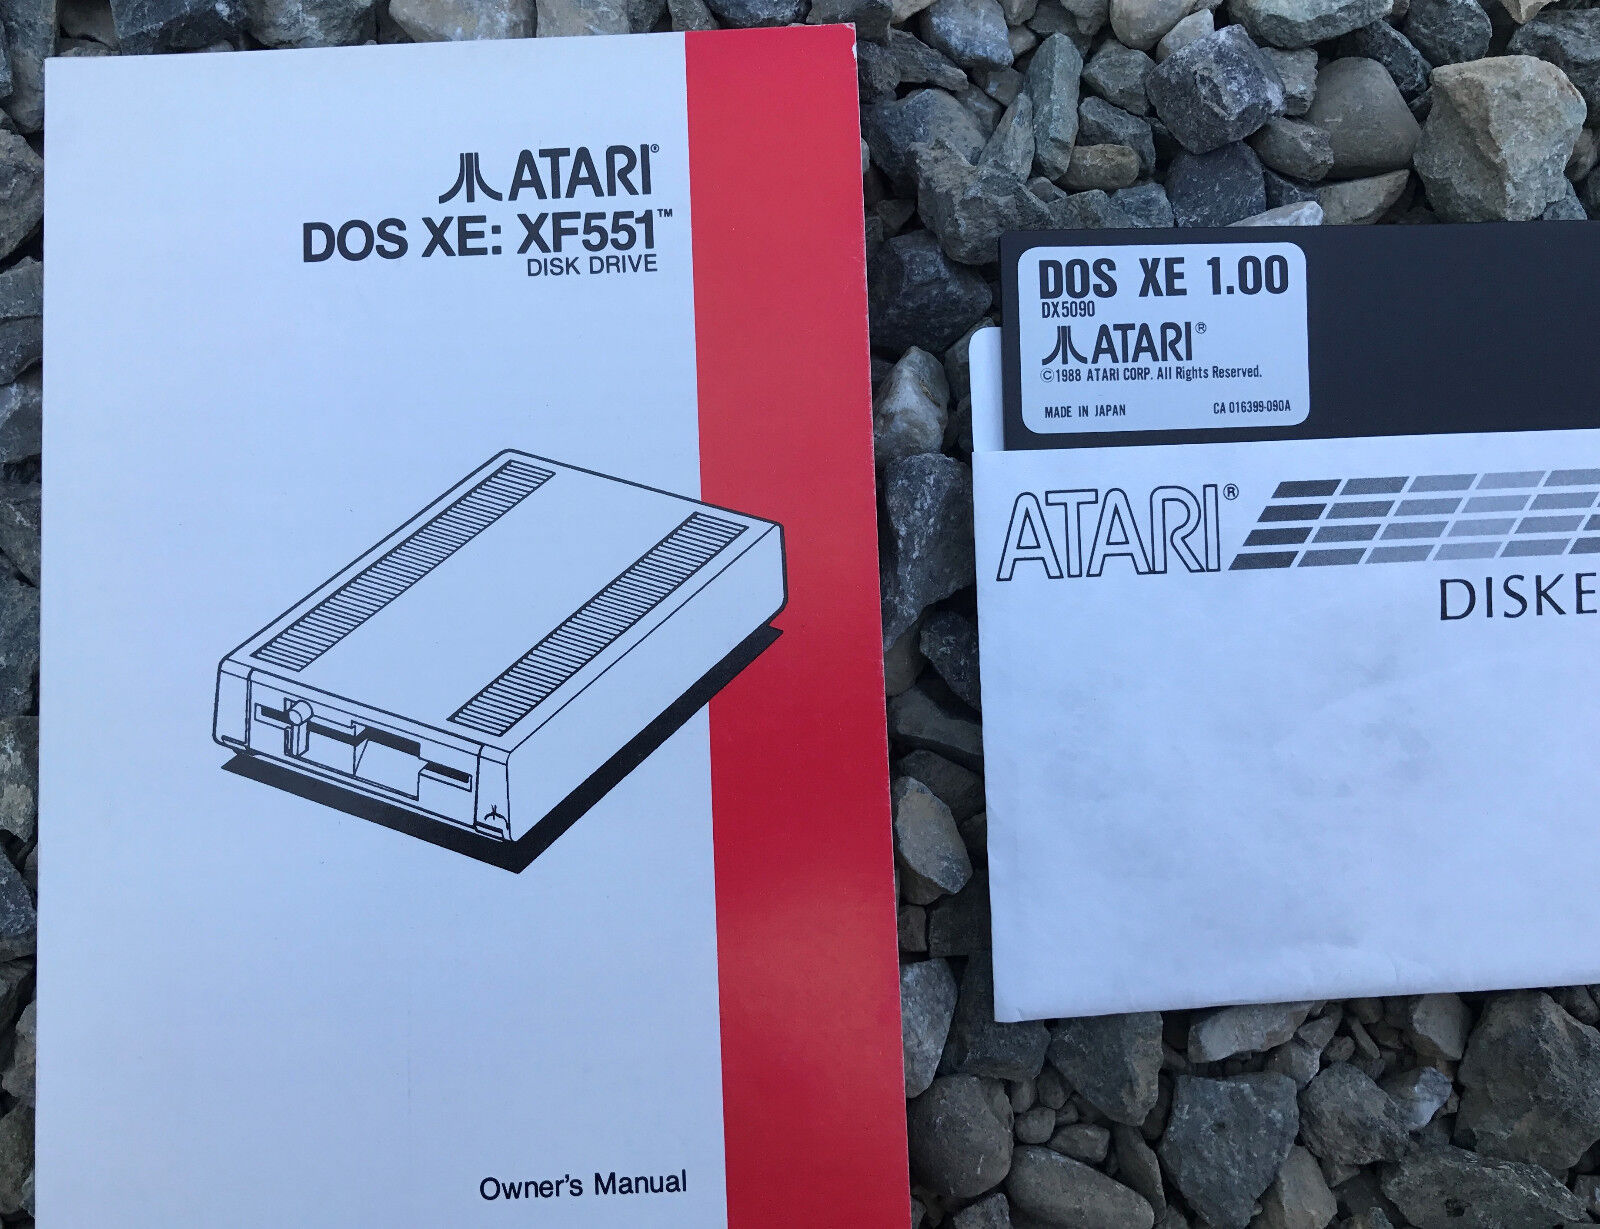 Atari OWNERS MANUAL for XF551 Disk Drive w/DOS XE DX 5090 NEW 800/XL/XE